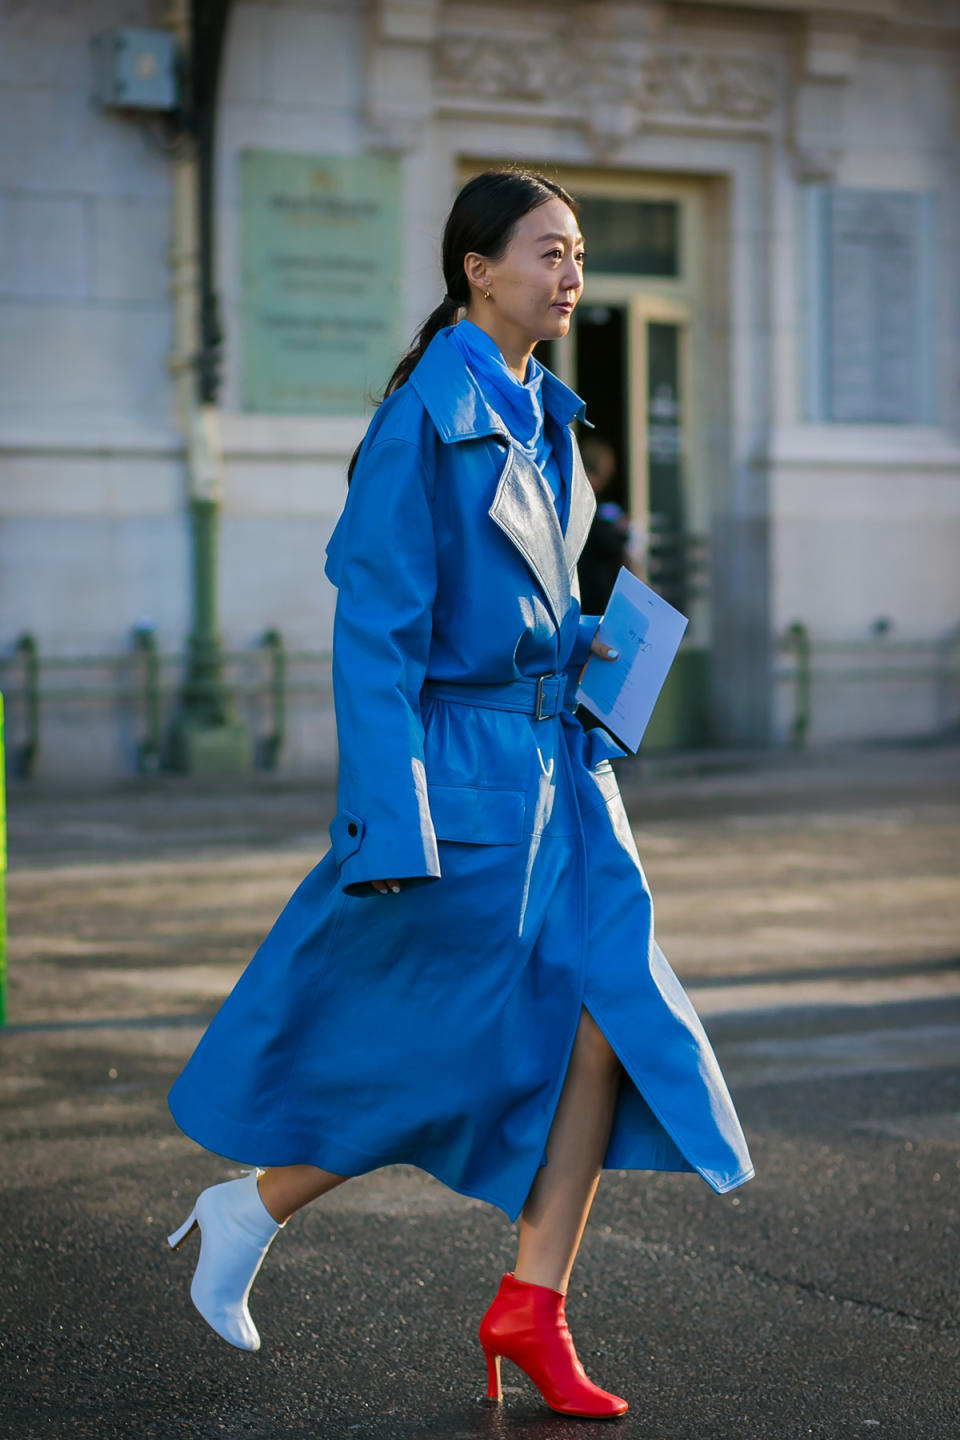 An Olivier Theyskens showgoer models the same trend in vibrant blue — with mismatched booties and extra-long sleeves adding just the right amount of off-kilter to her look.